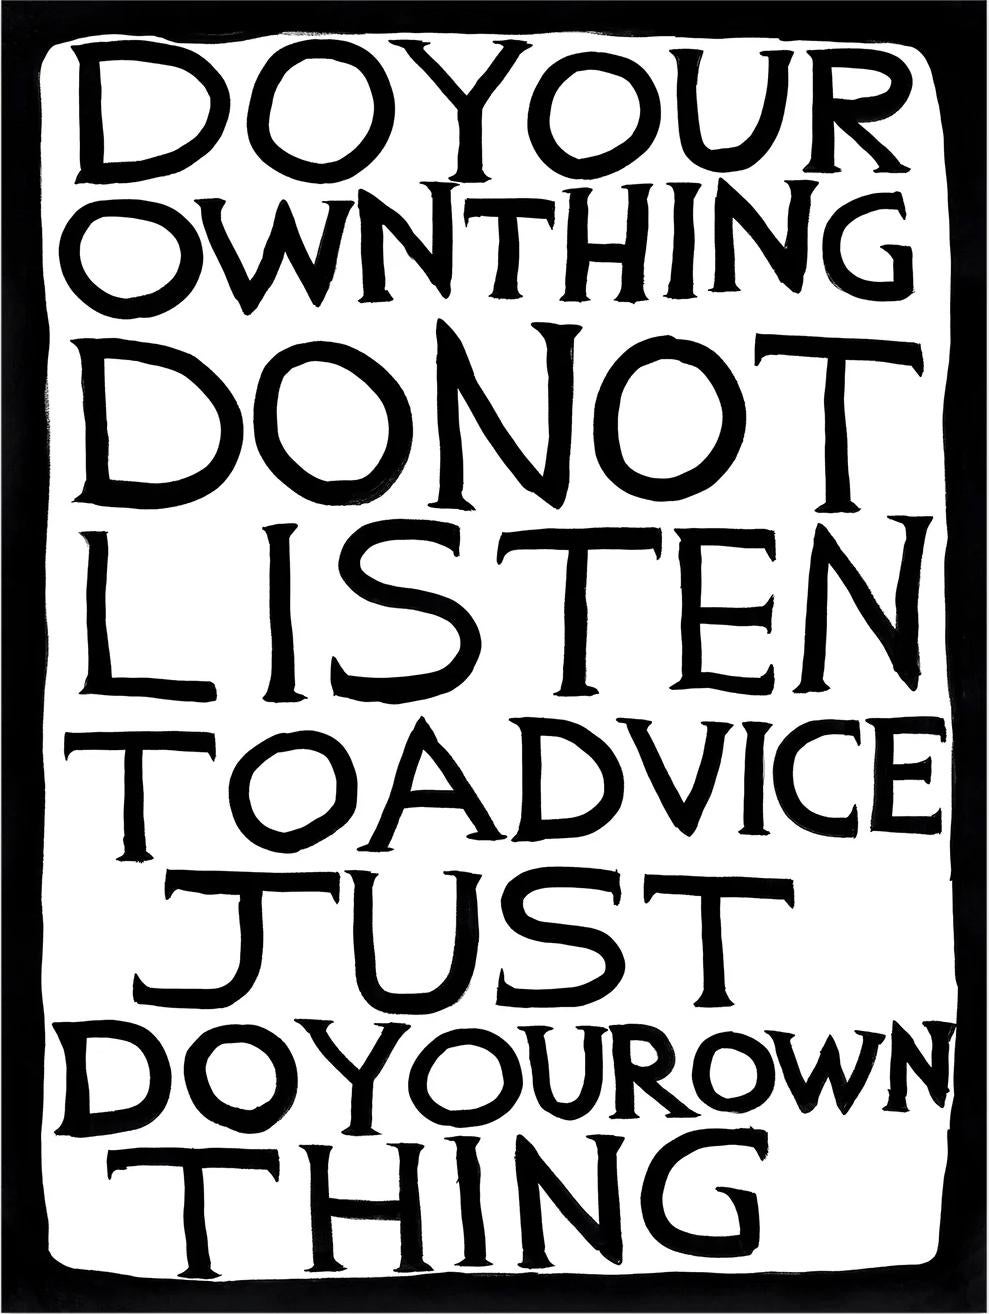 David Shrigley (English b. 1968)
Untitled (Do Your Own Thing), 2022
Off-set lithograph
Open edition, unframed
50 x 70cm (19.69 x 27.56 inches)
Printed on 200g Munken Lynx paper by Narayana Press in Denmark

This print is based on the original work